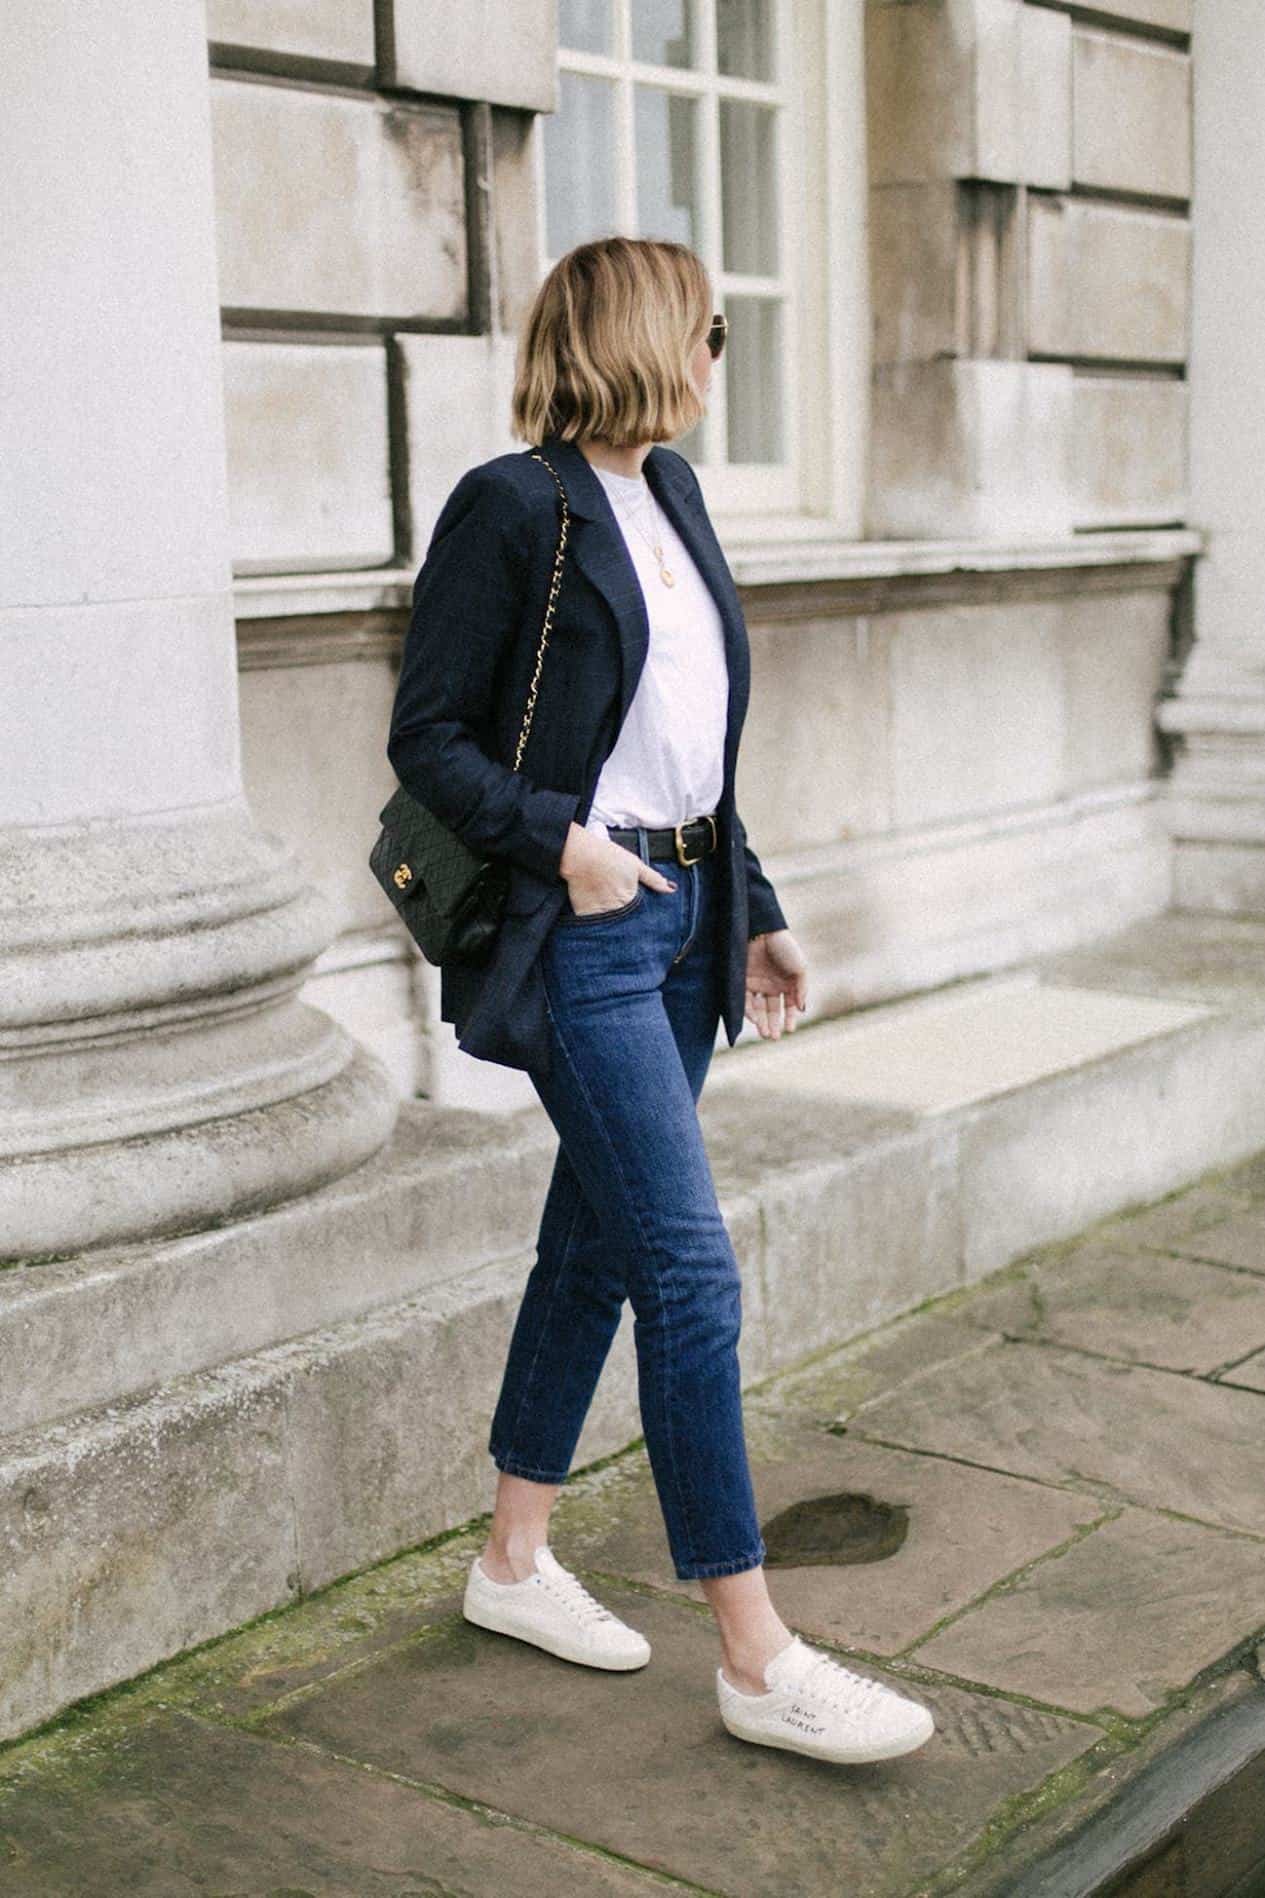 image of a woman standing on a sidewalk wearing blue jeans, a white t-shirt, a navy blazer, and white sneakers